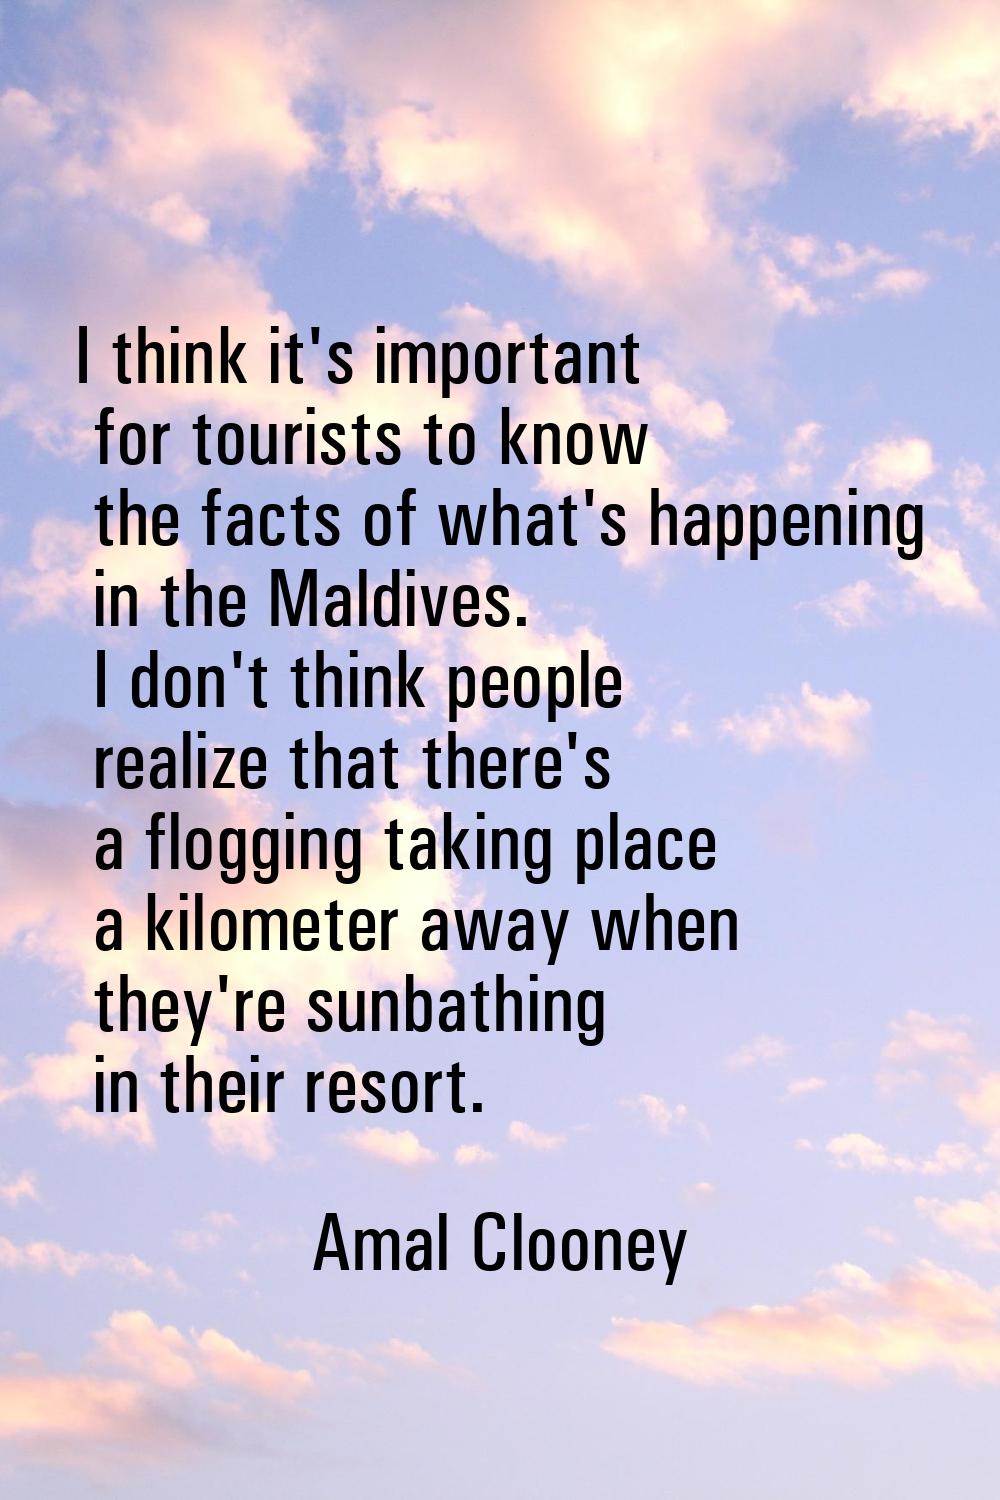 I think it's important for tourists to know the facts of what's happening in the Maldives. I don't 